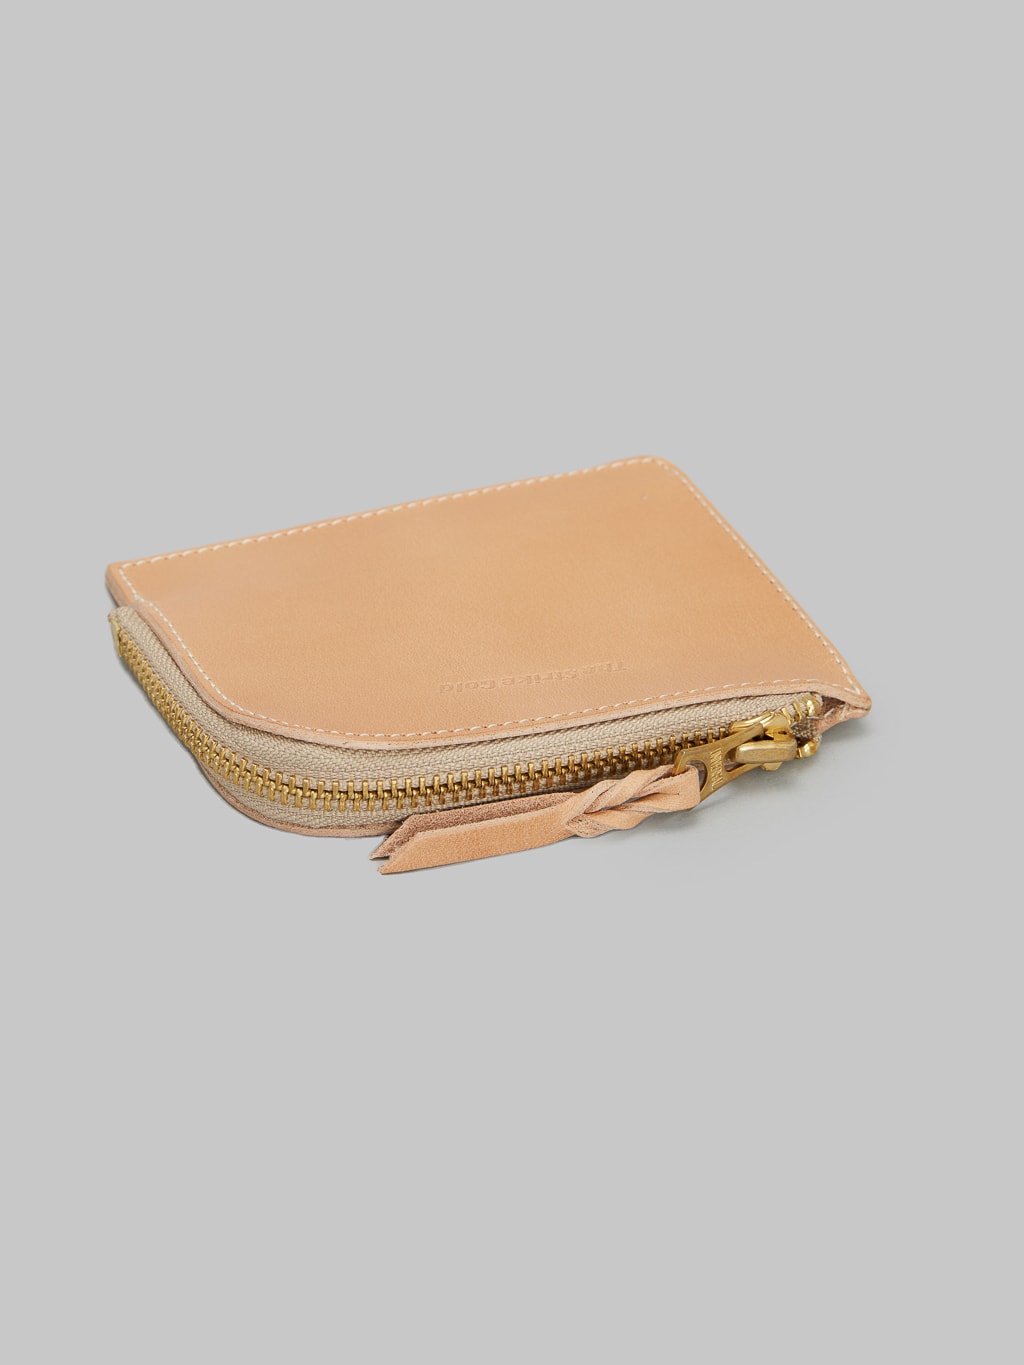 The Strike Gold Leather Zip Wallet Natural bill purse